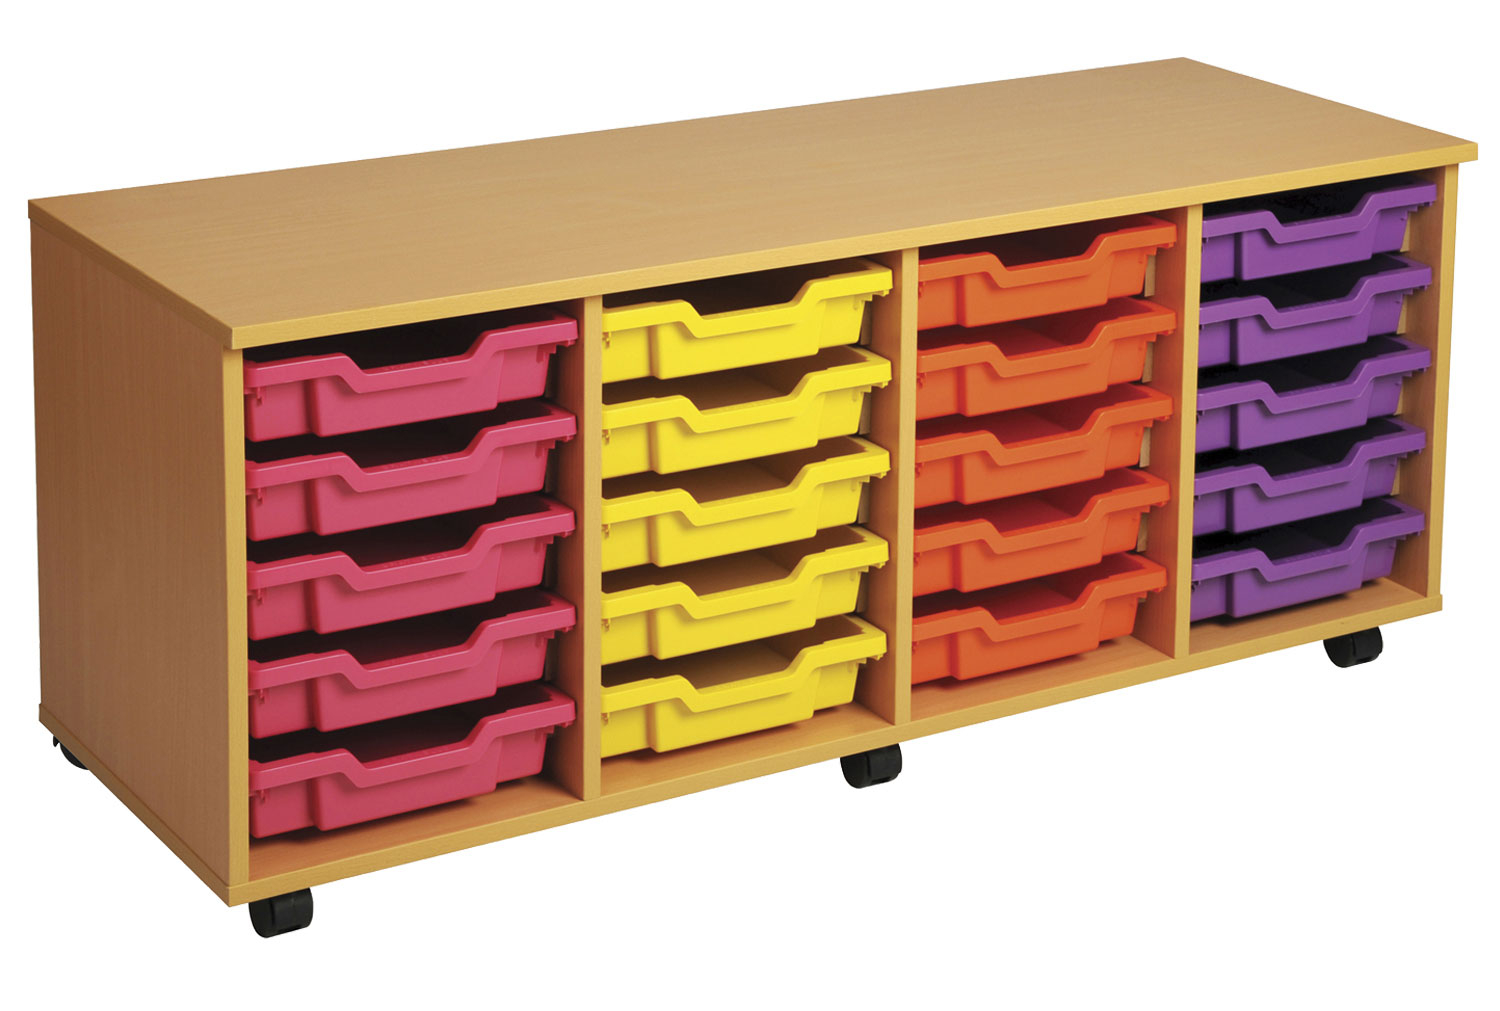 Primary 4 Column Mobile Tray Storage Unit With 20 Shallow Trays